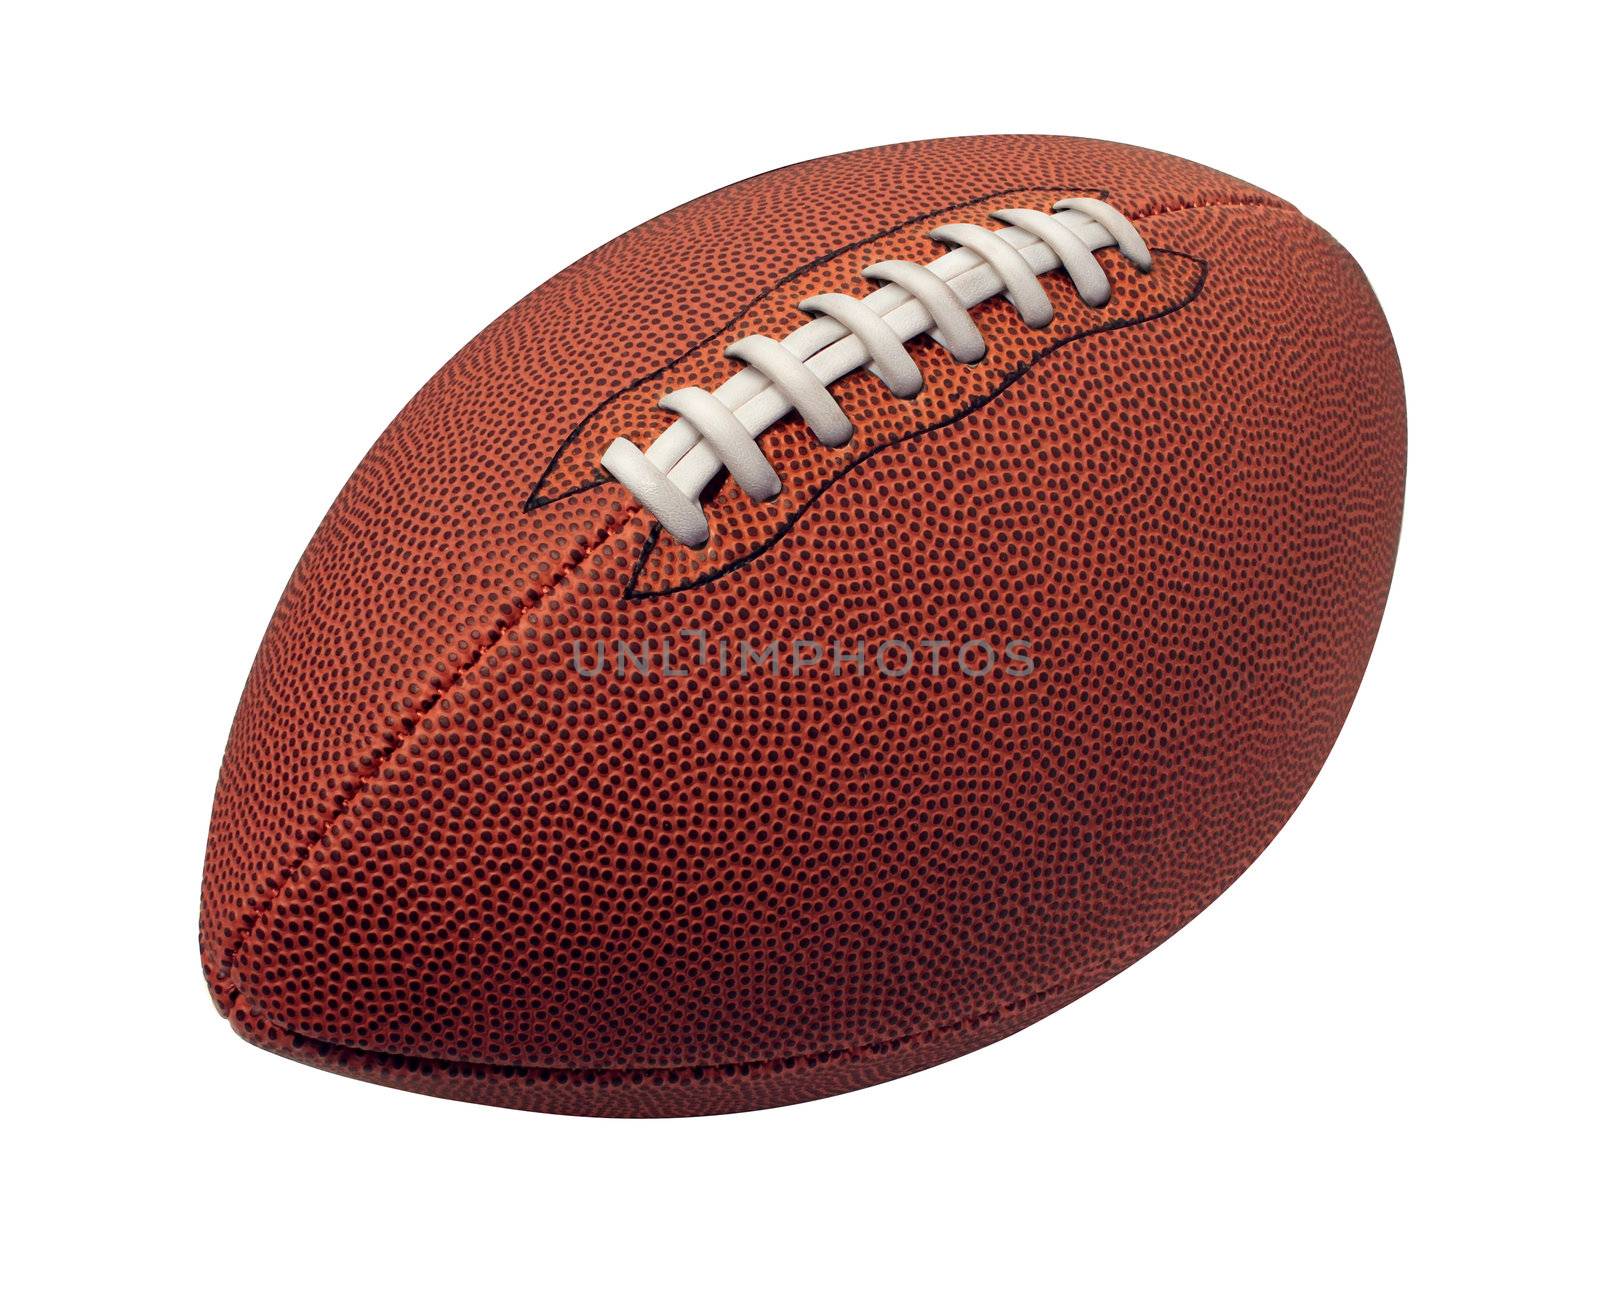 Football isolated on a white background as a professional sport ball for traditional American and Canadian game play on a white background.